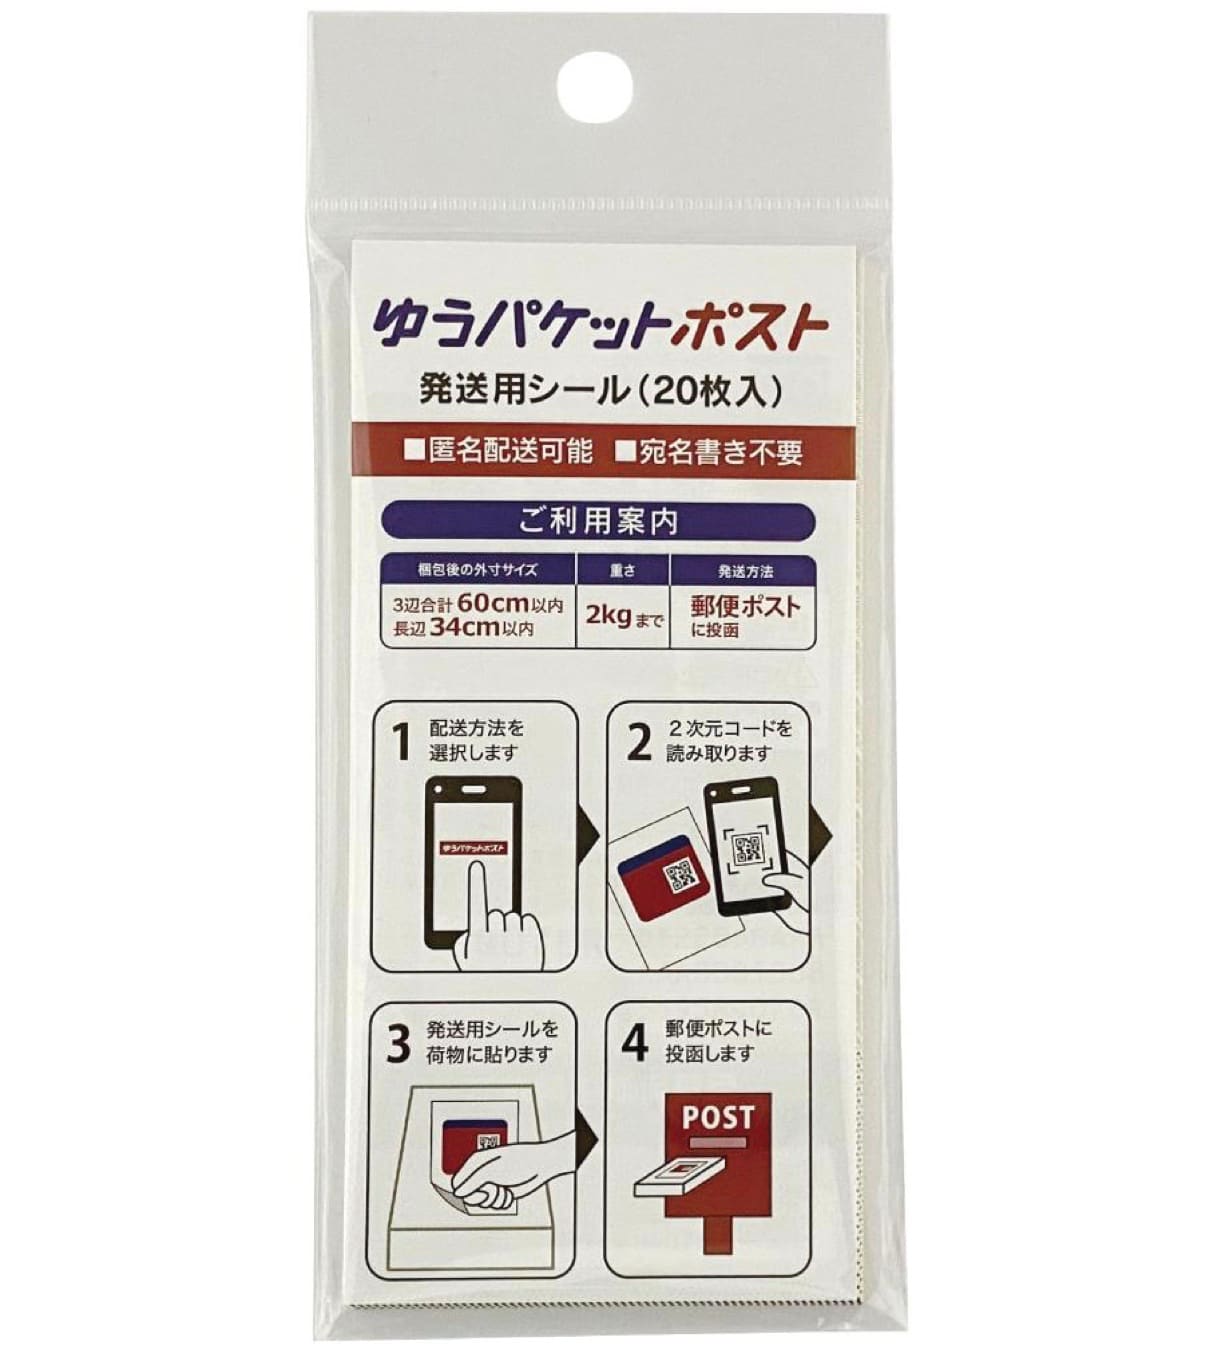 94%OFF!】 ゆうパケットポスト発送用シール１００枚 １１日まで